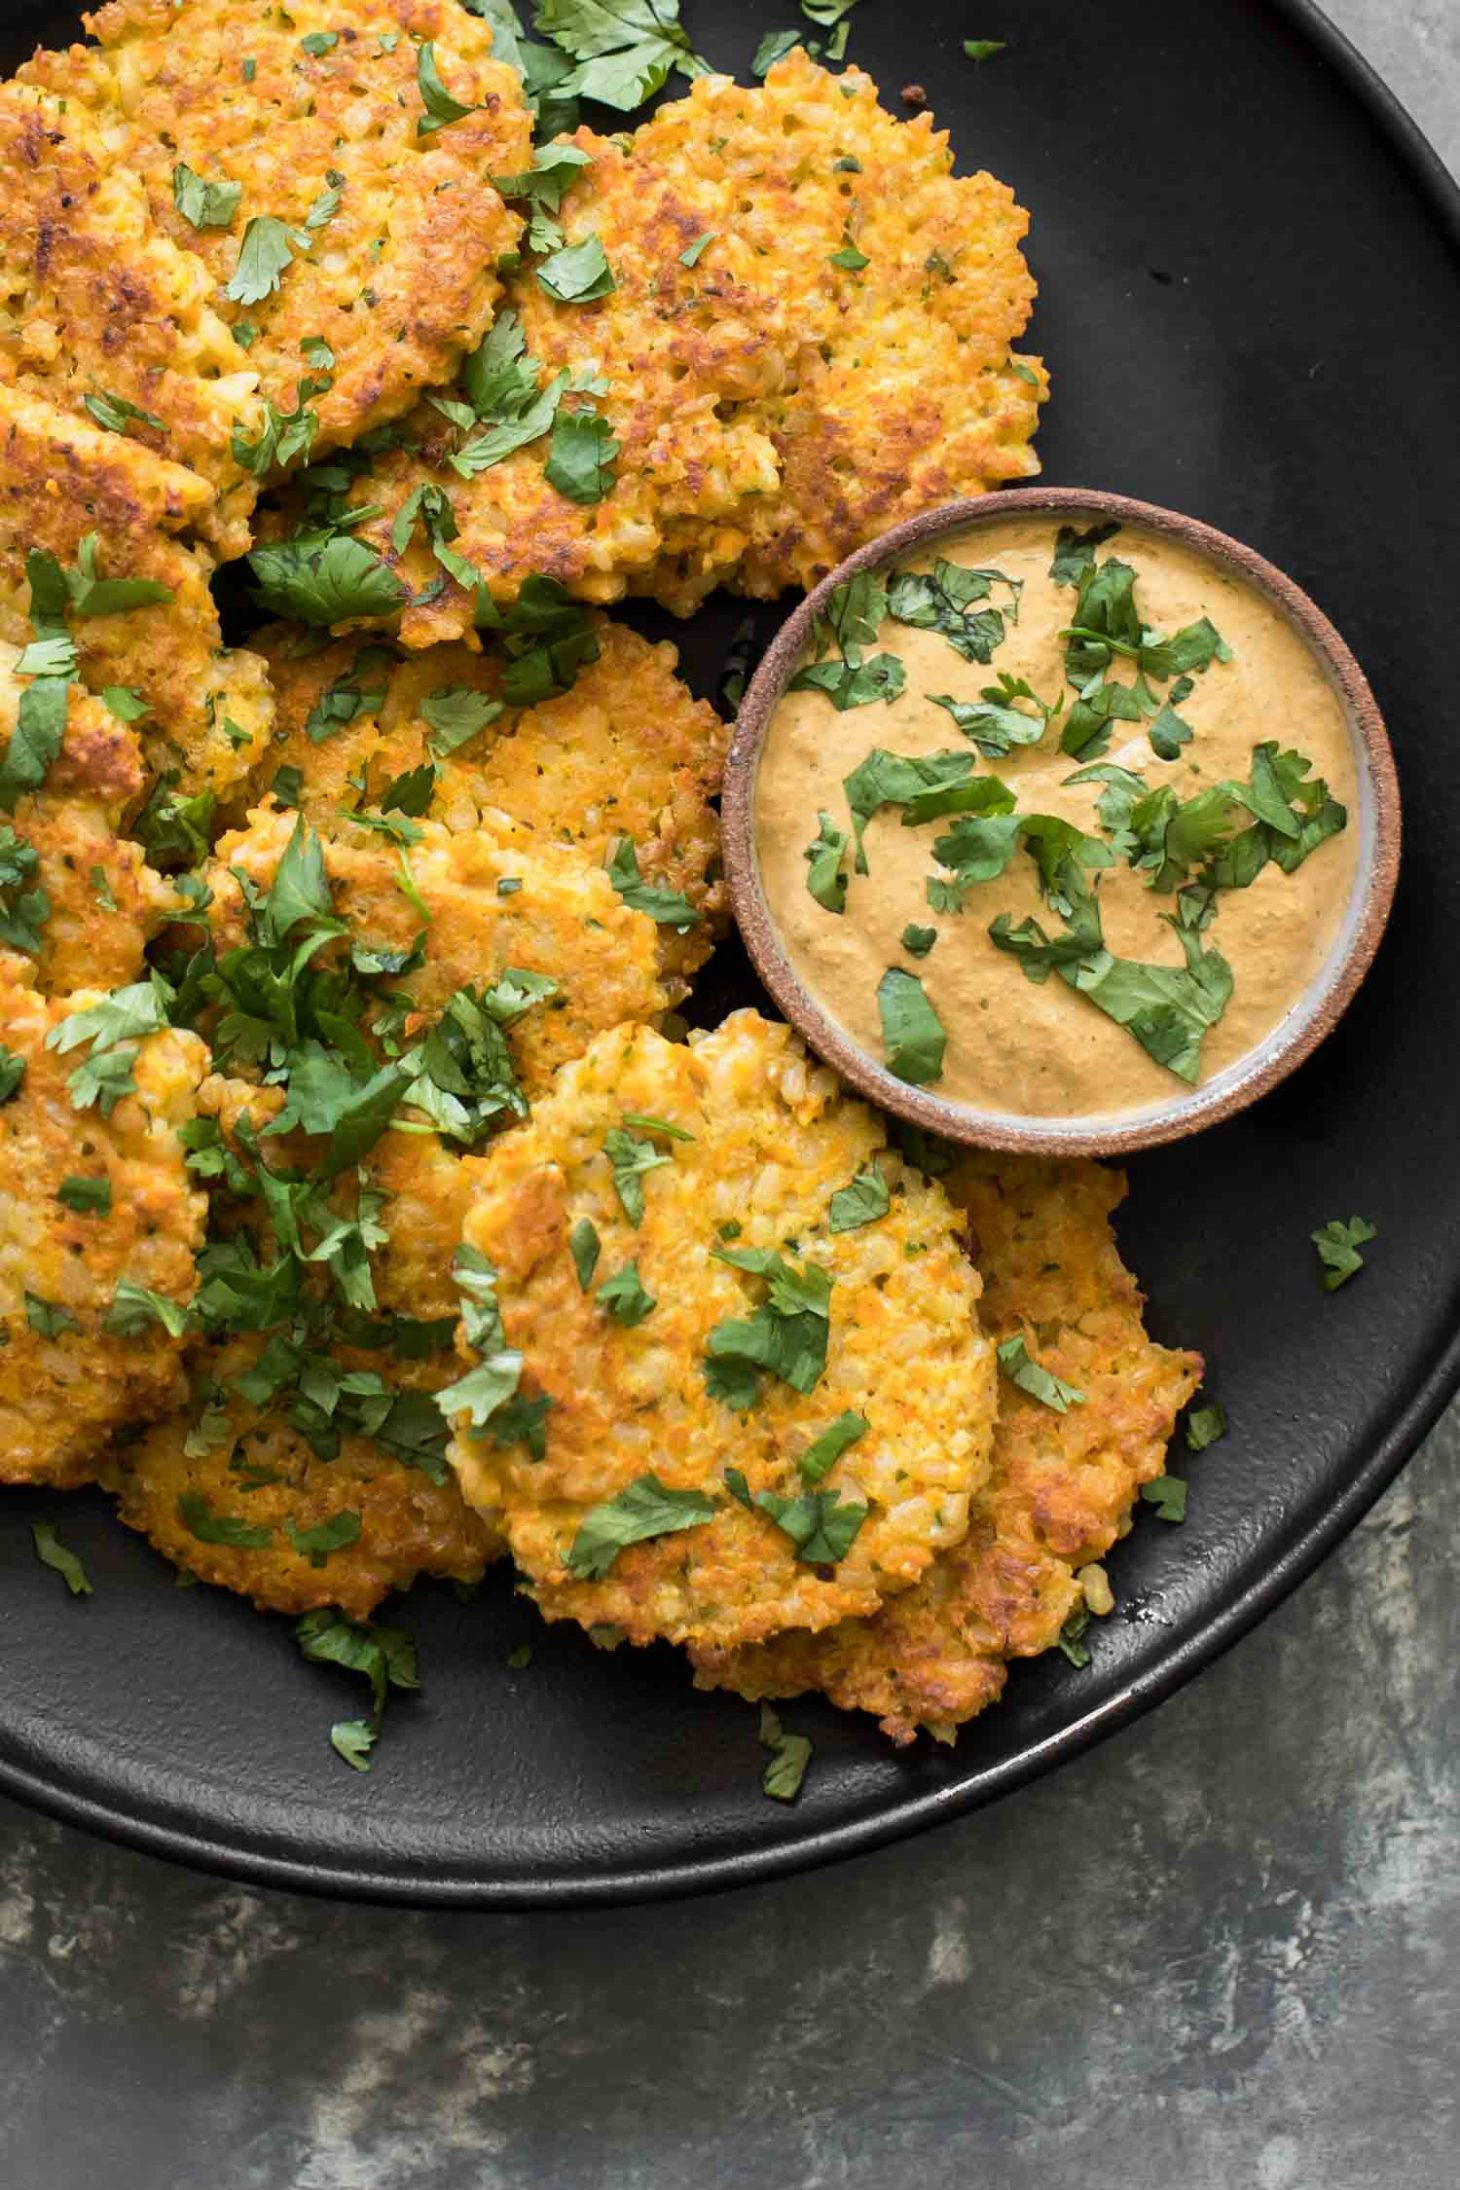 Carrot Recipes Vegetarian
 Brown Rice Carrot Fritters with Chipotle Sunflower Sauce